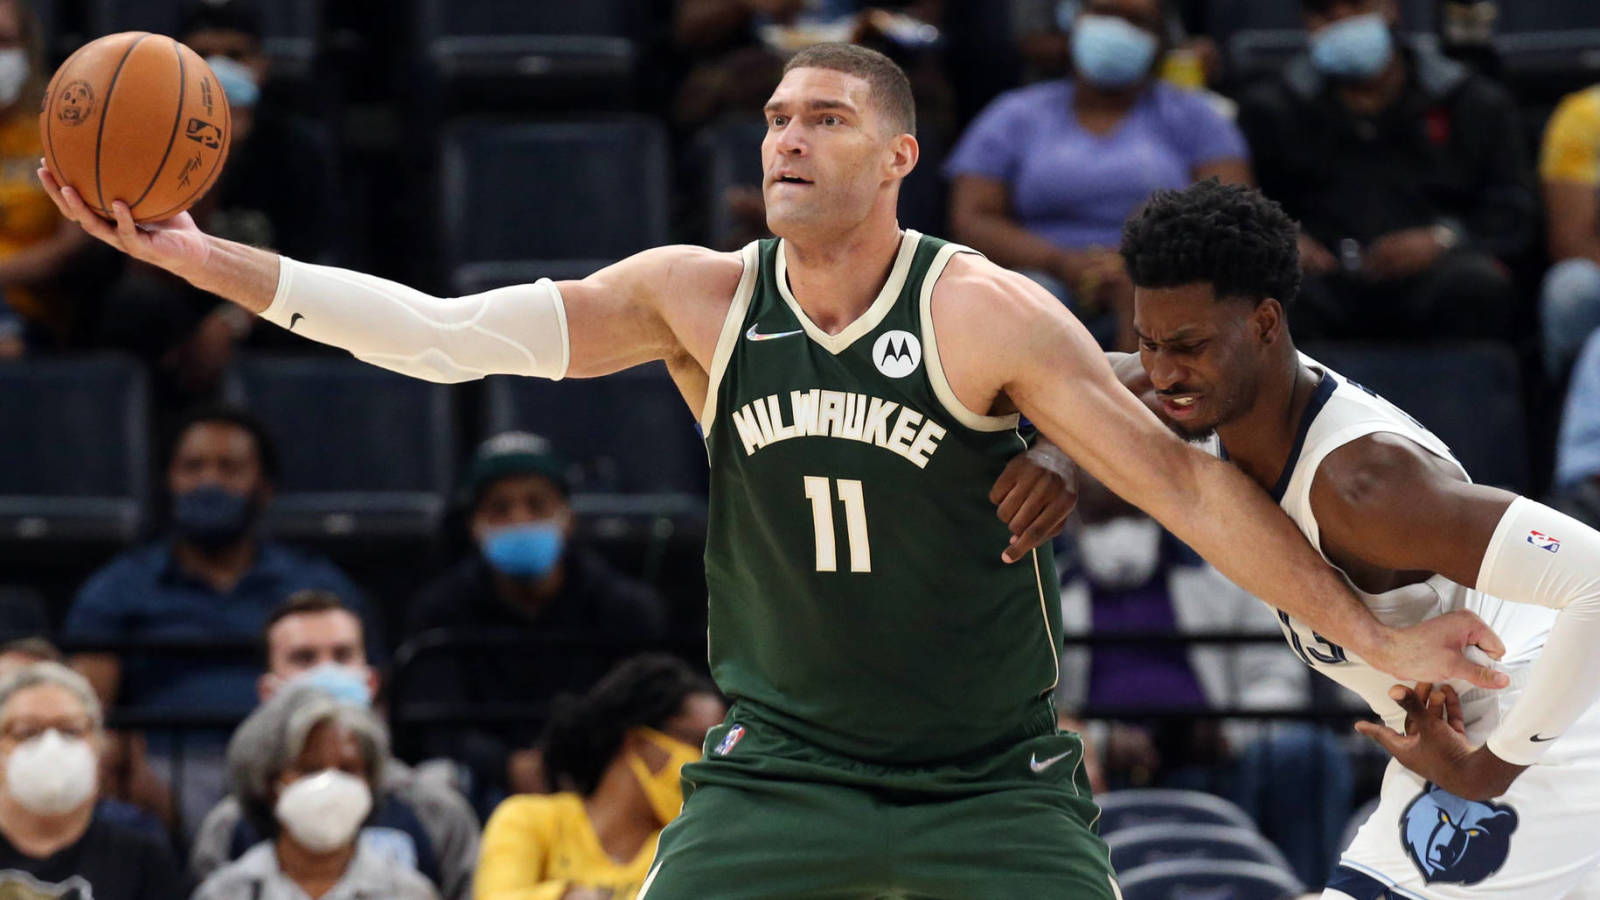 Report: Bucks have 'optimism' that one-time All-Star Brook Lopez could return this season